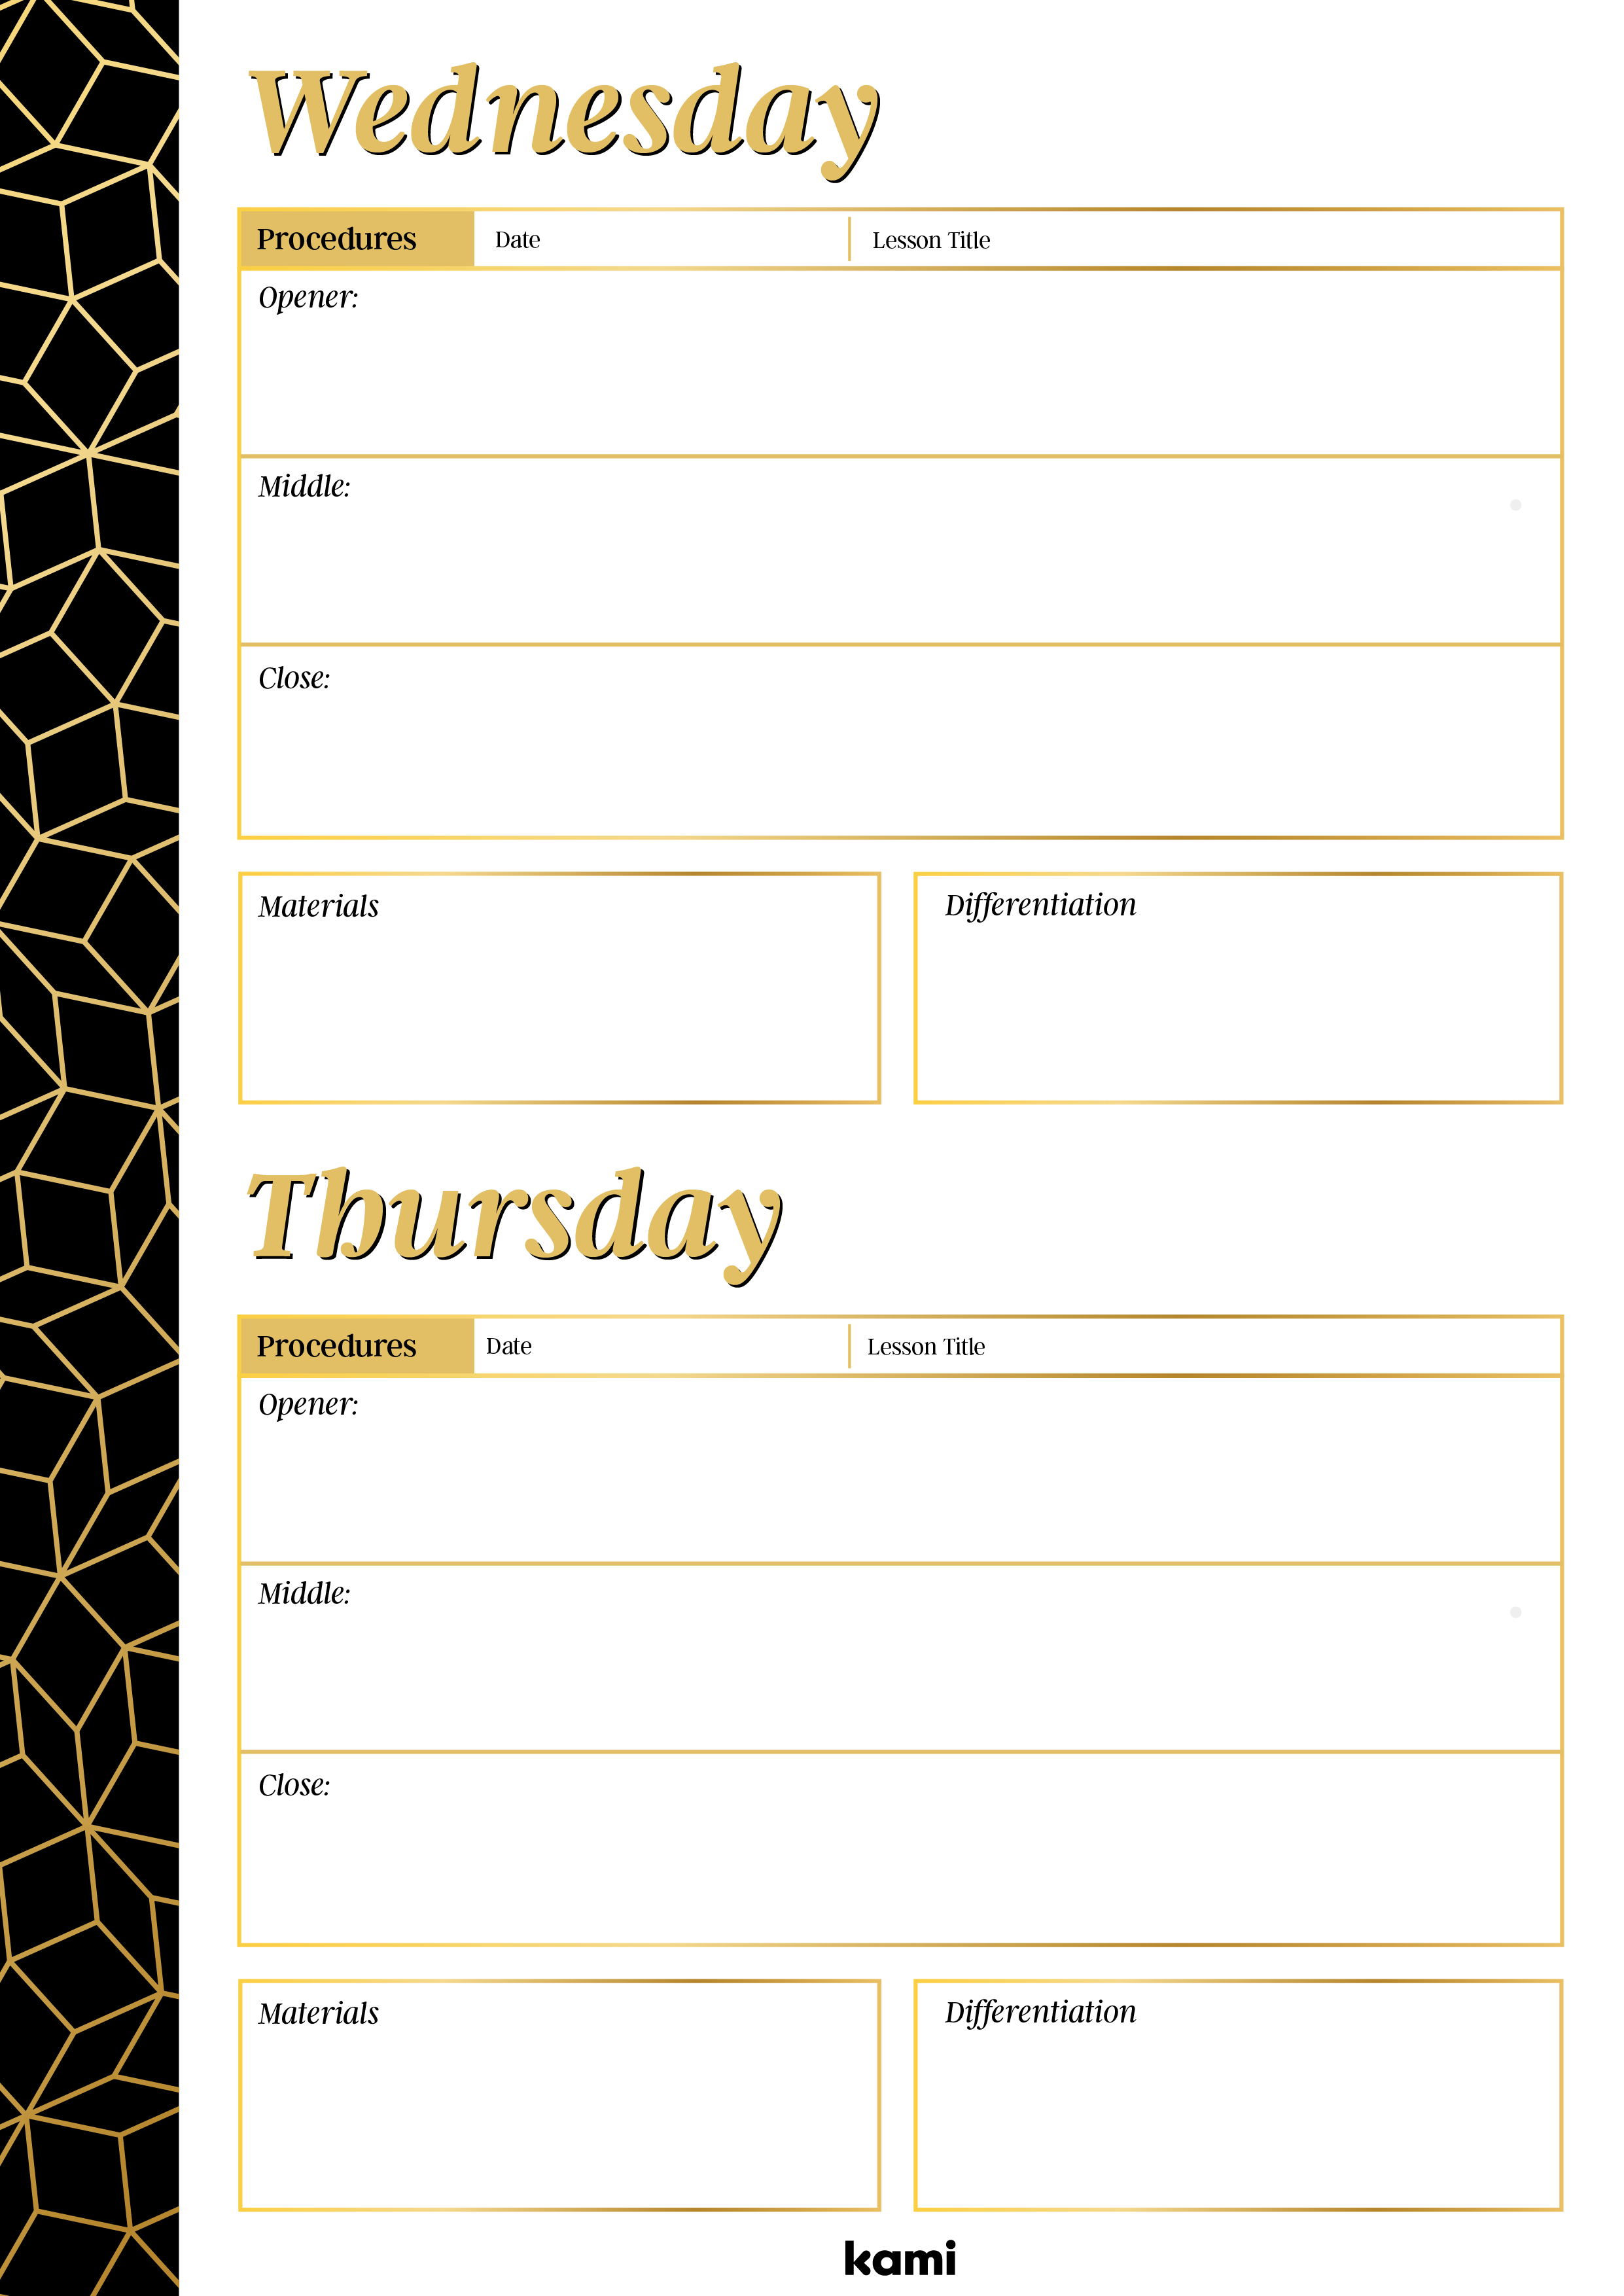 A Weekly Overview Lesson Plan for Teachers with a Black & Gold Theme